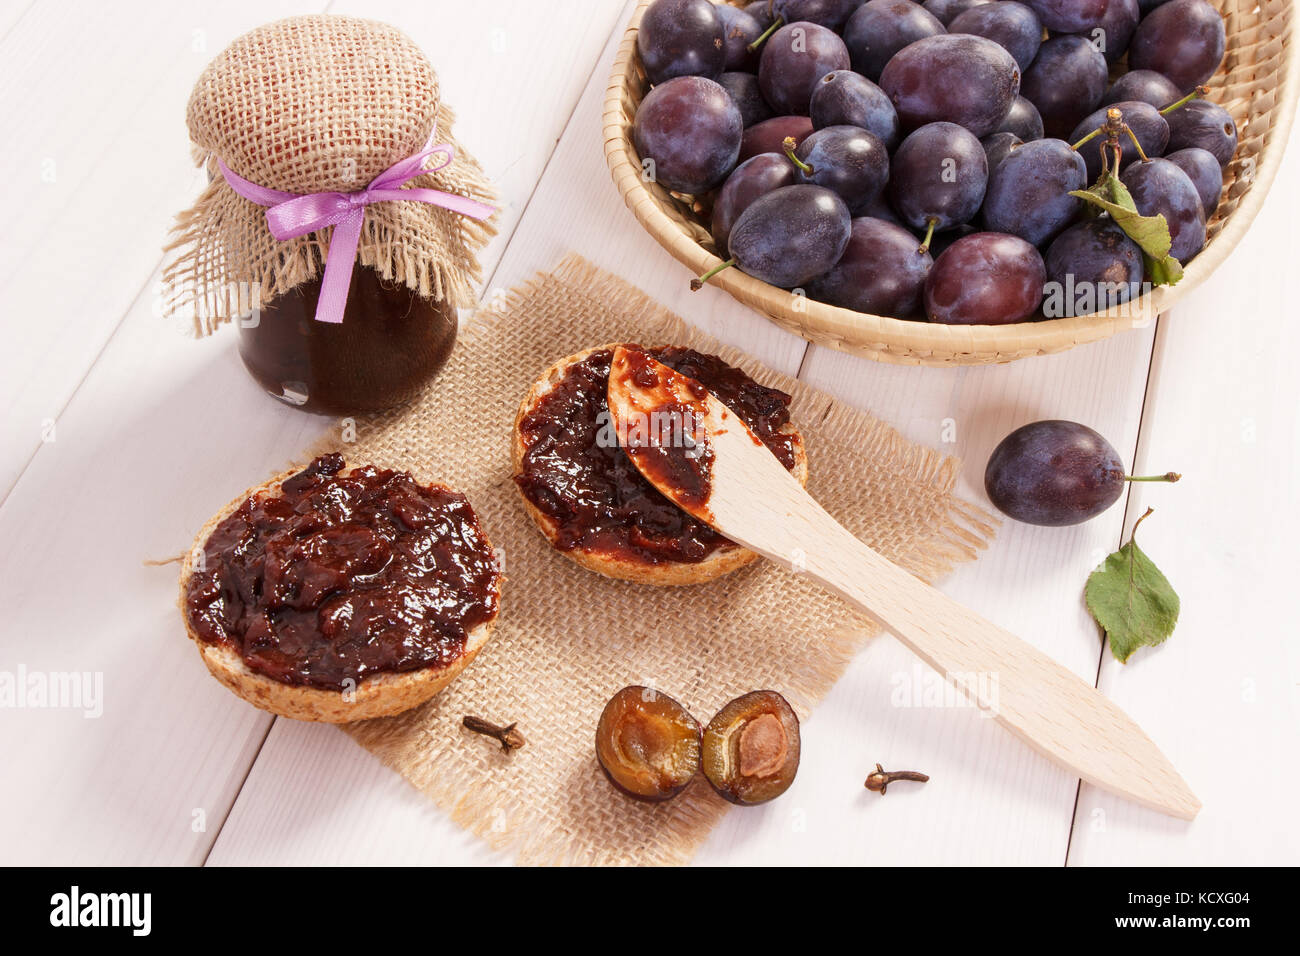 Wooden knife, sandwiches with plum marmalade or jam on jute burlap, concept of preparation delicious breakfast Stock Photo